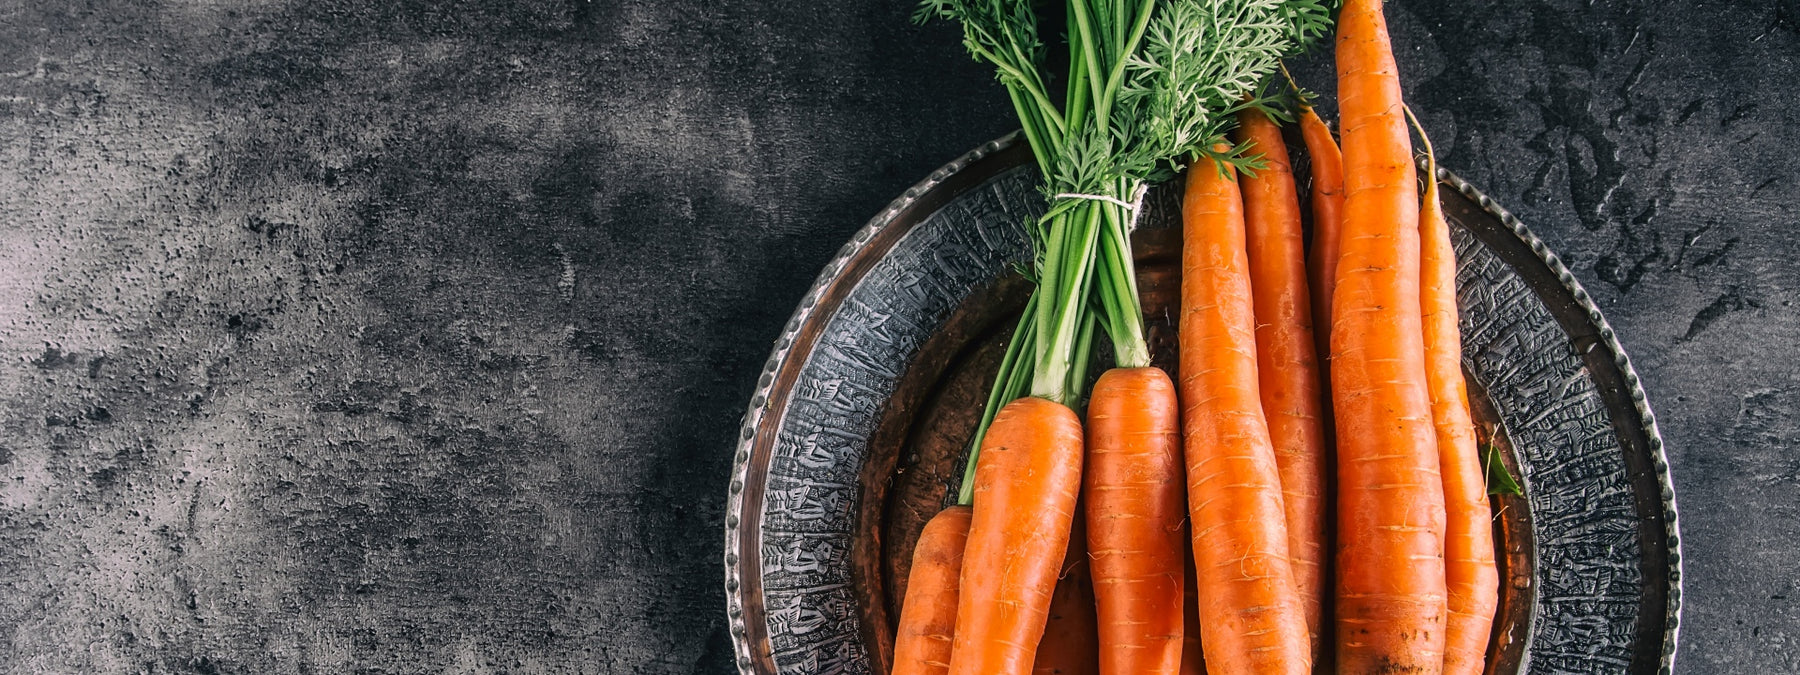 Carrots - Comprehensive Guide to Benefits and Nutrition